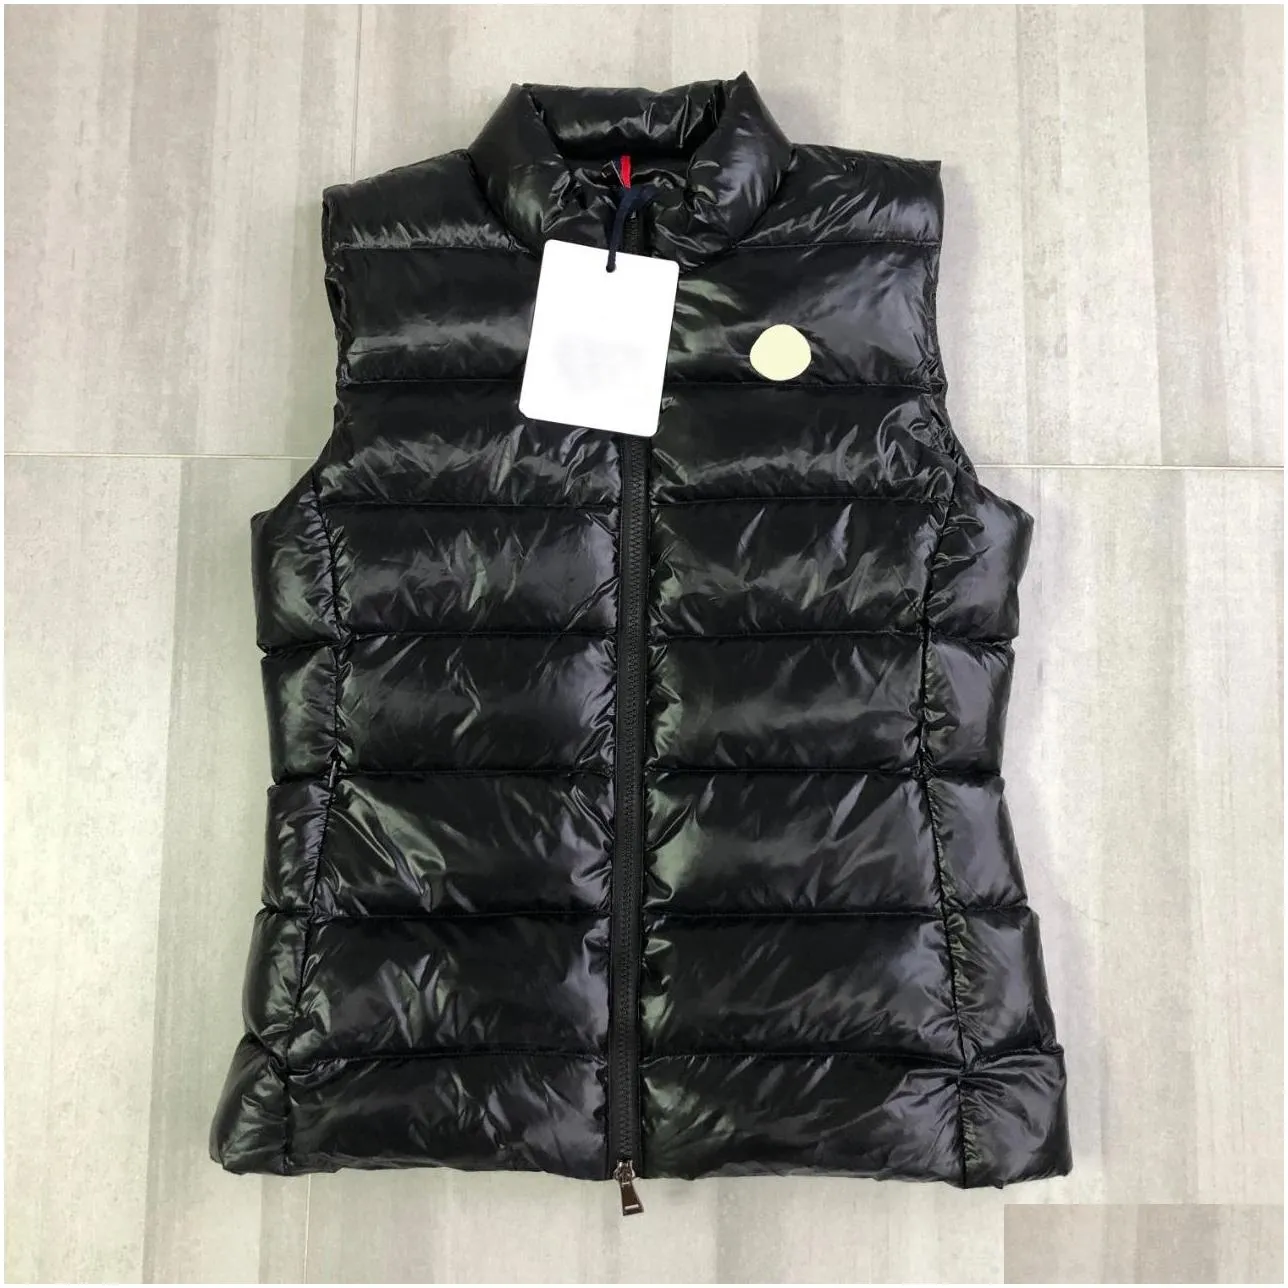 womens down vest jackets french designer brand sleeveless lady vest luxury embroidery badge outerwear coats size s/m/l/xl